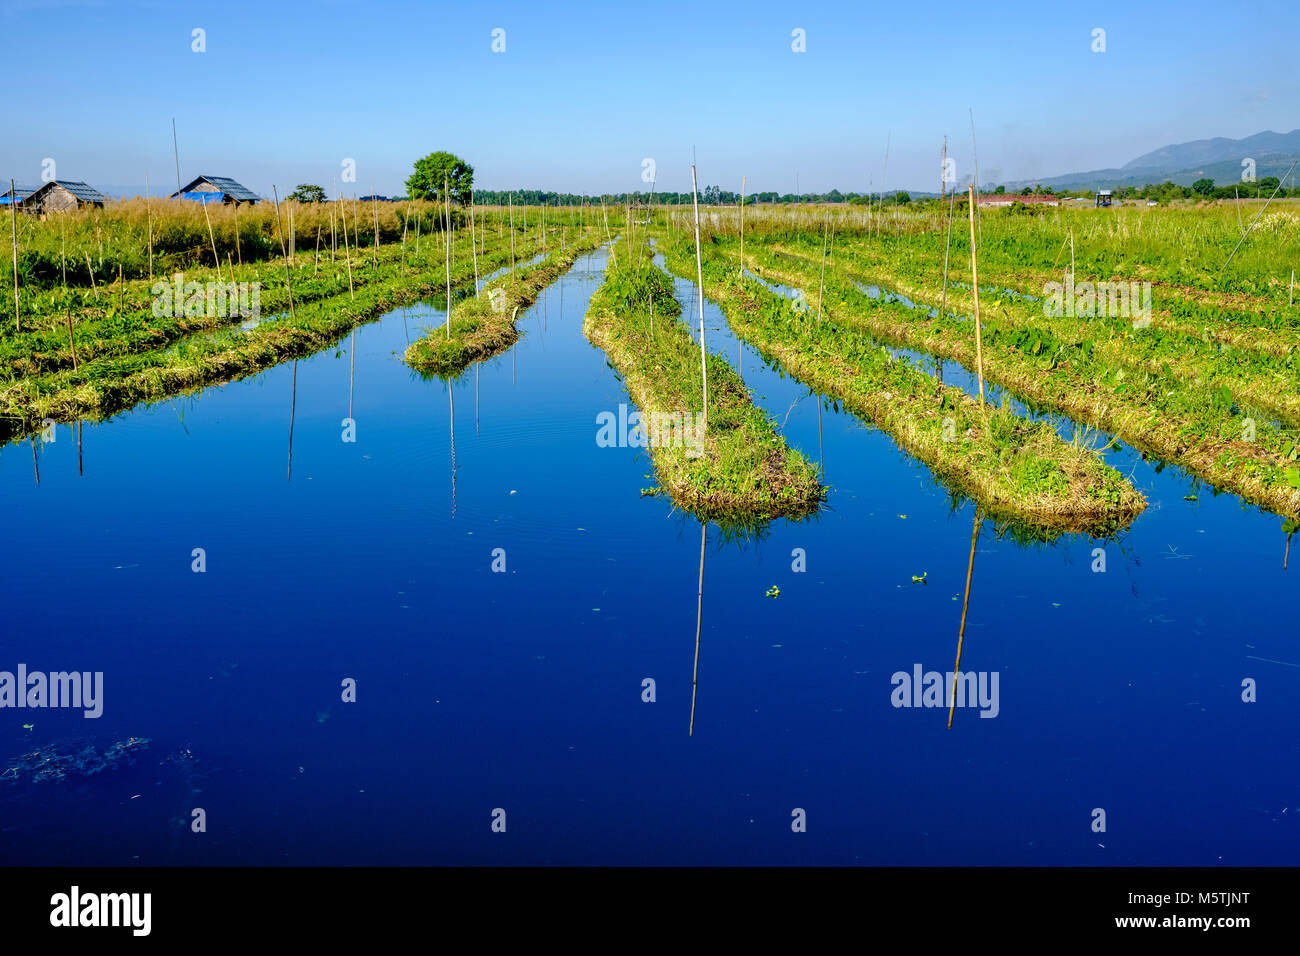 Swimming gardens are set up on Inle lake to grow tomatoes and other vegetables on Inle lake Stock Photo